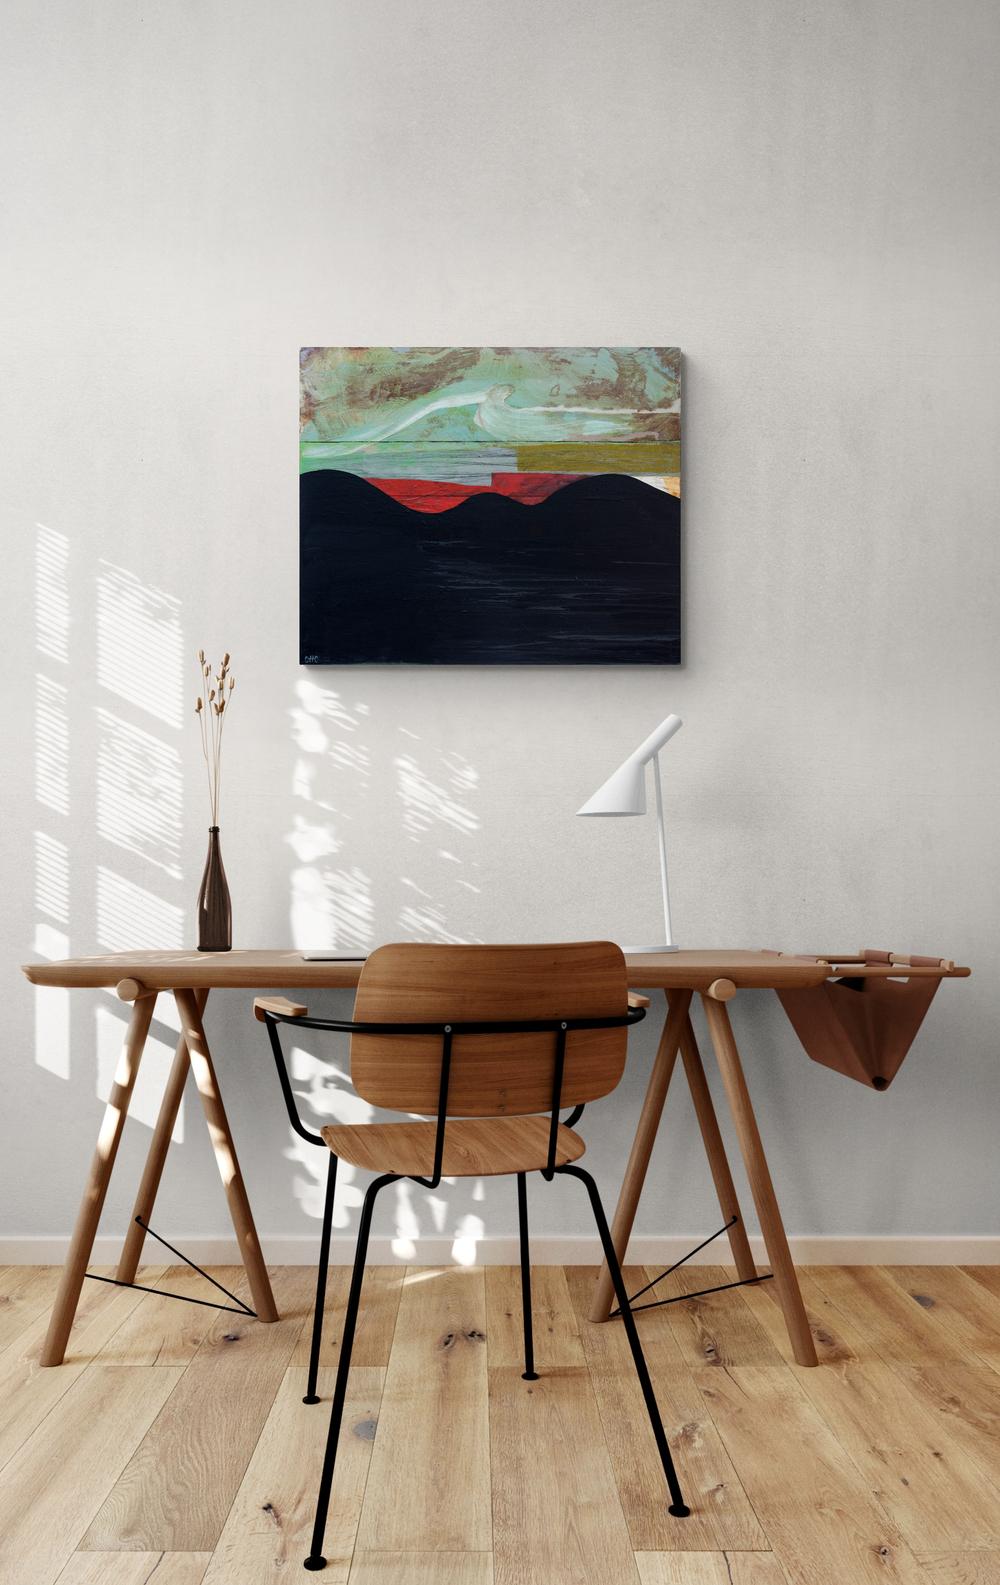 A rich black ground undulates at the horizon where it meets geometric passages of crimson, ochre, grey and peach in this acrylic canvas by Otto Rogers. A calligraphic swoop of brushed white, a passing cloud, completes this powerful